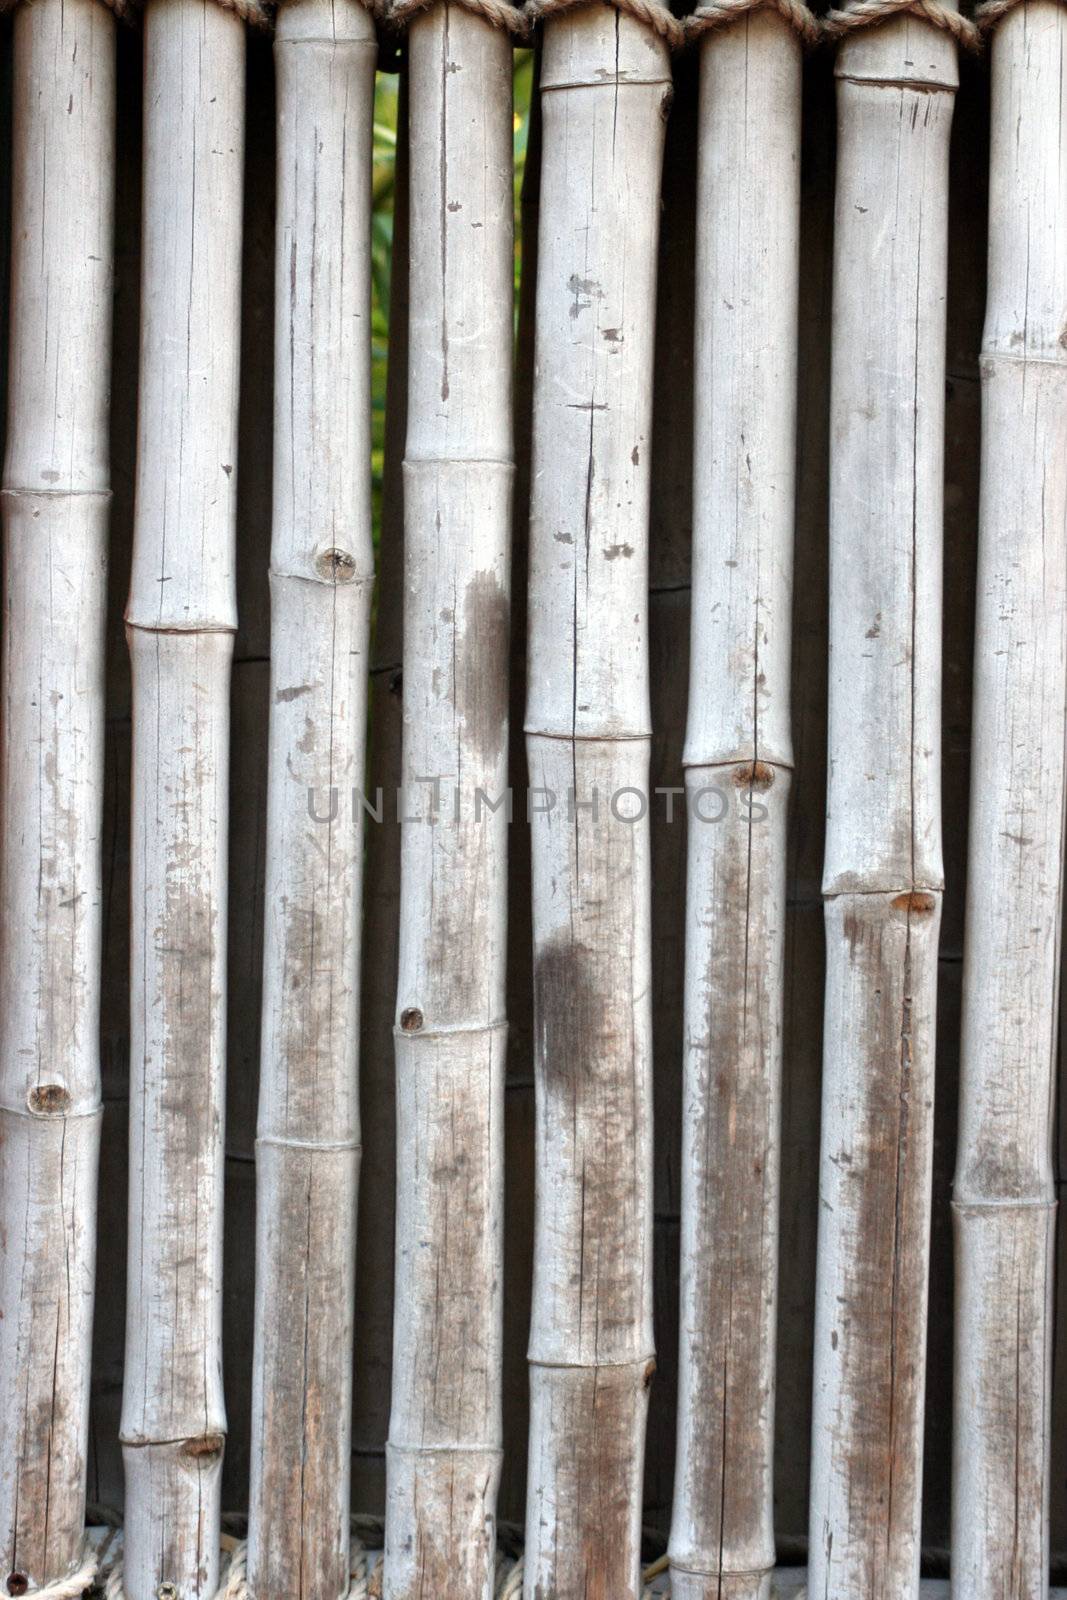 Bamboo Wall by AreaPhotography